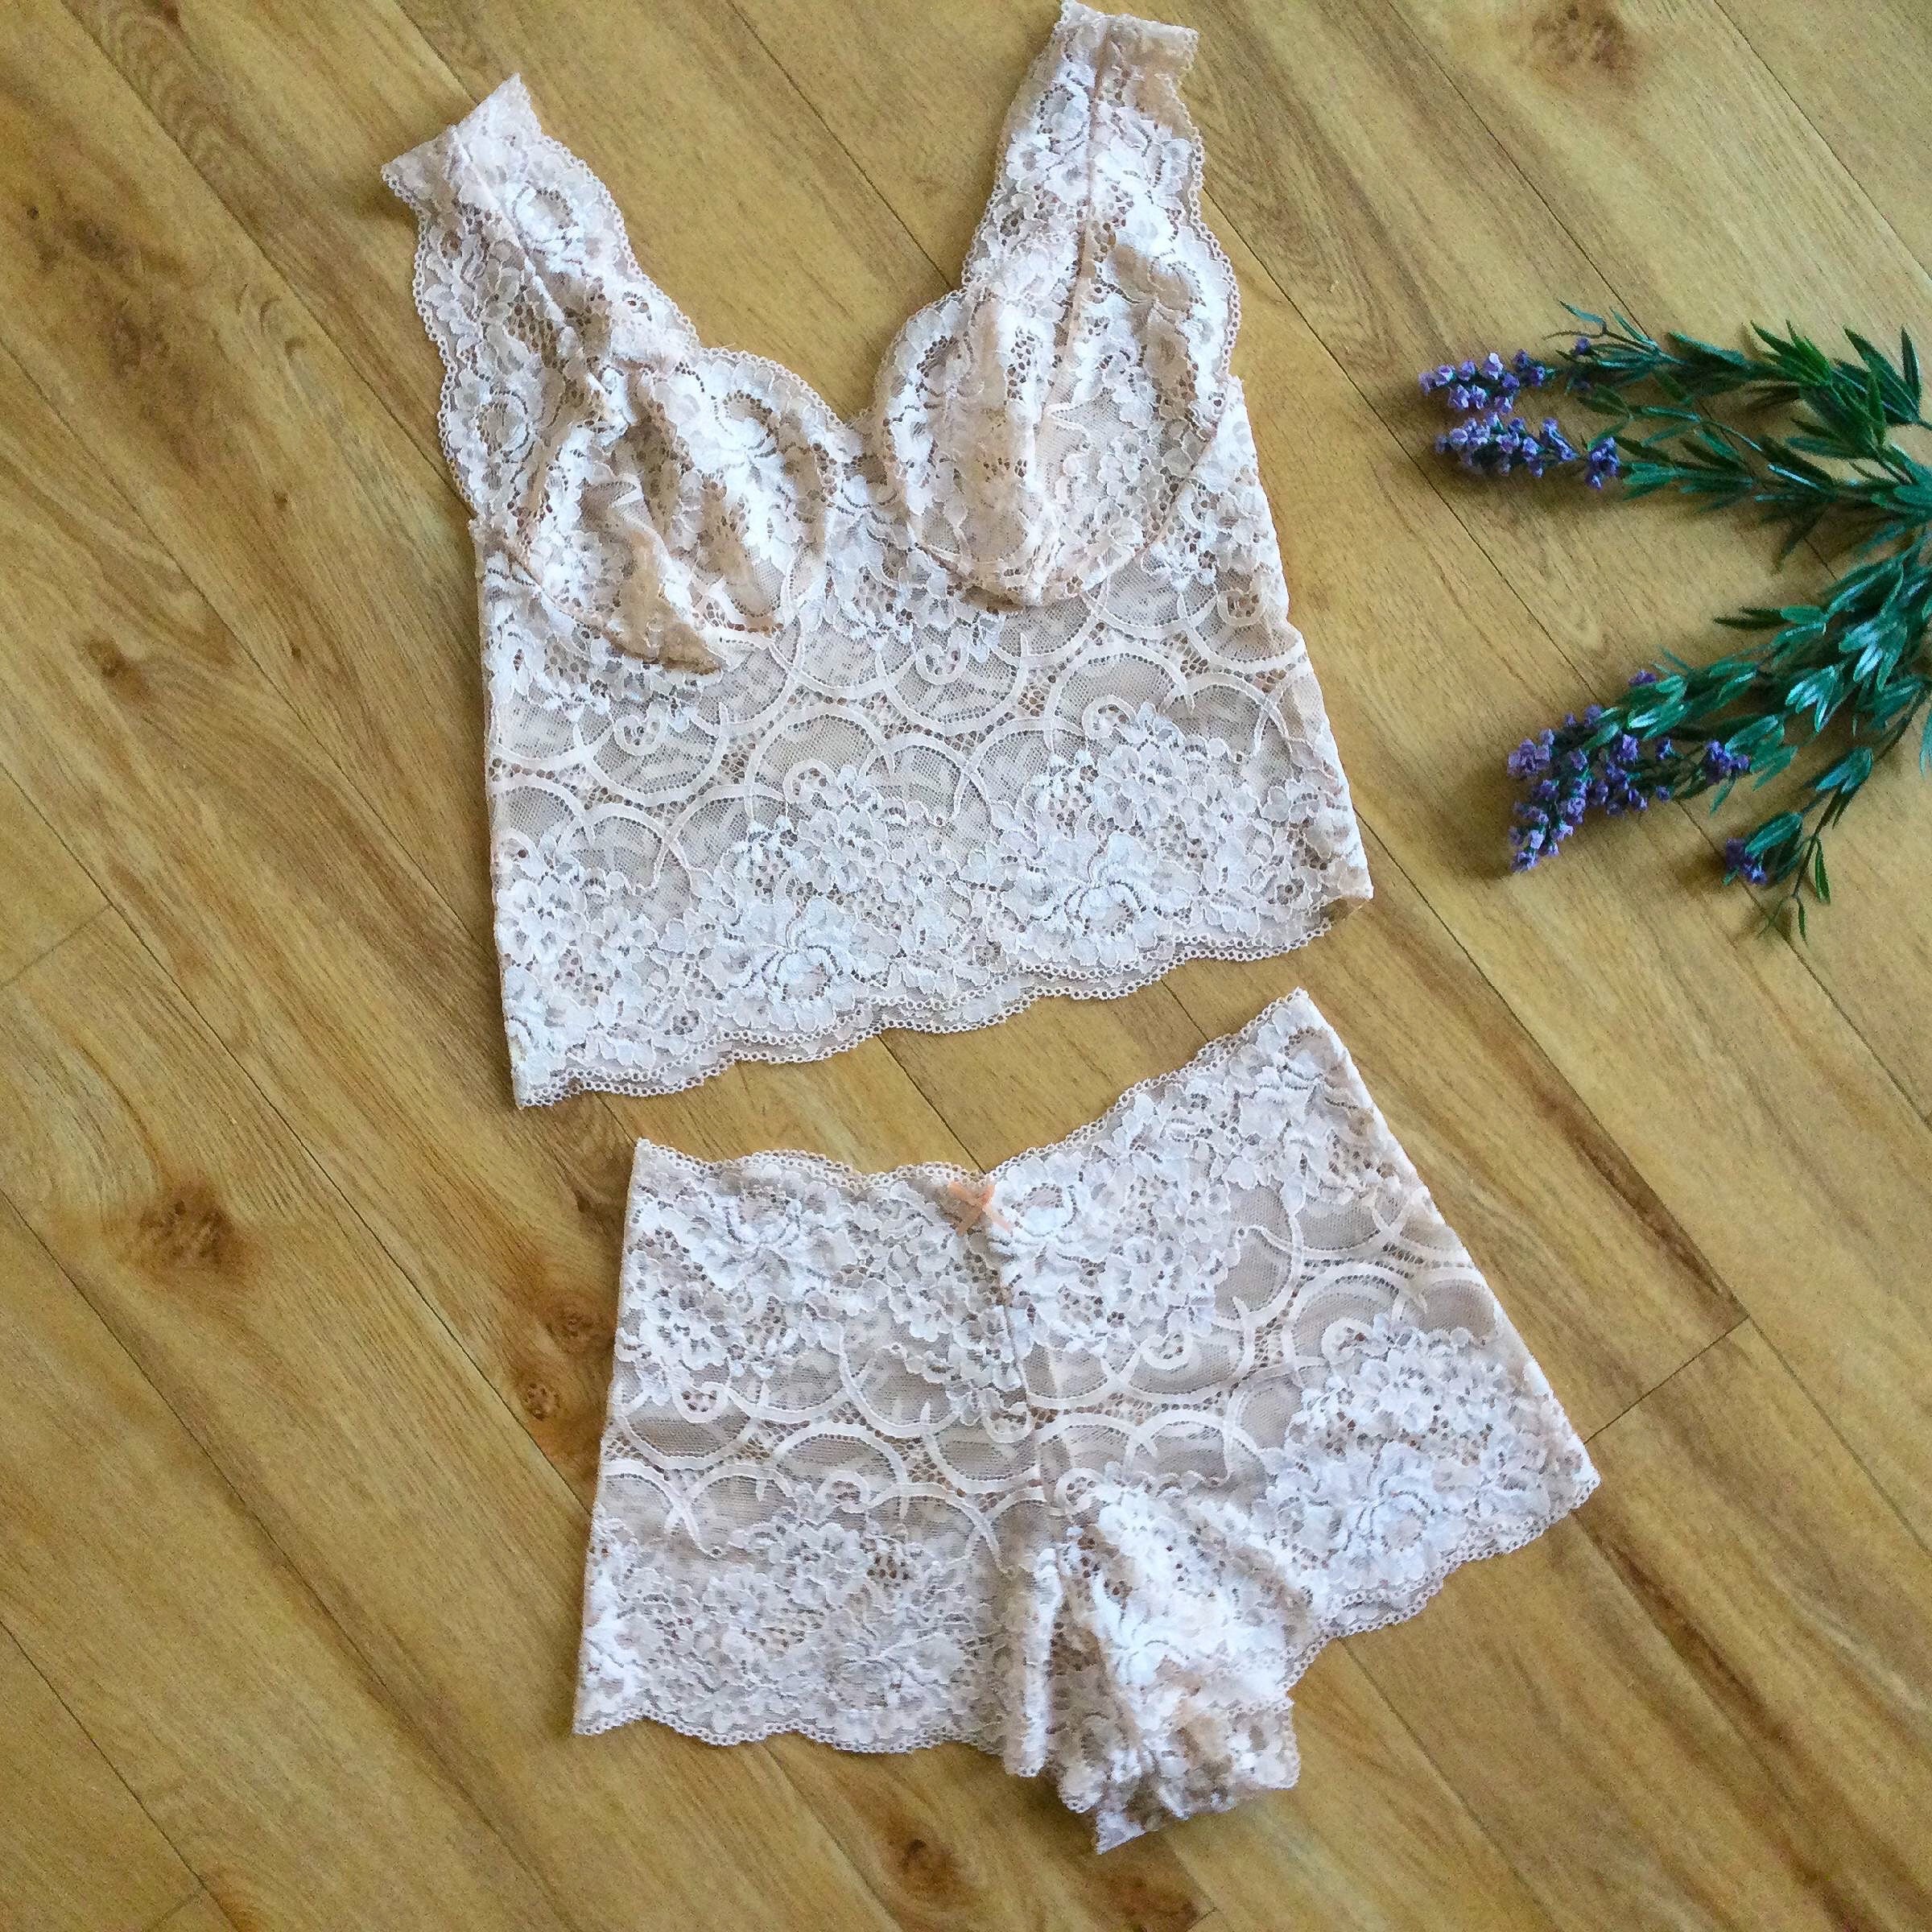 Sweetheart Spaghetti Strap Lace Bralette in Two Tone Color-way